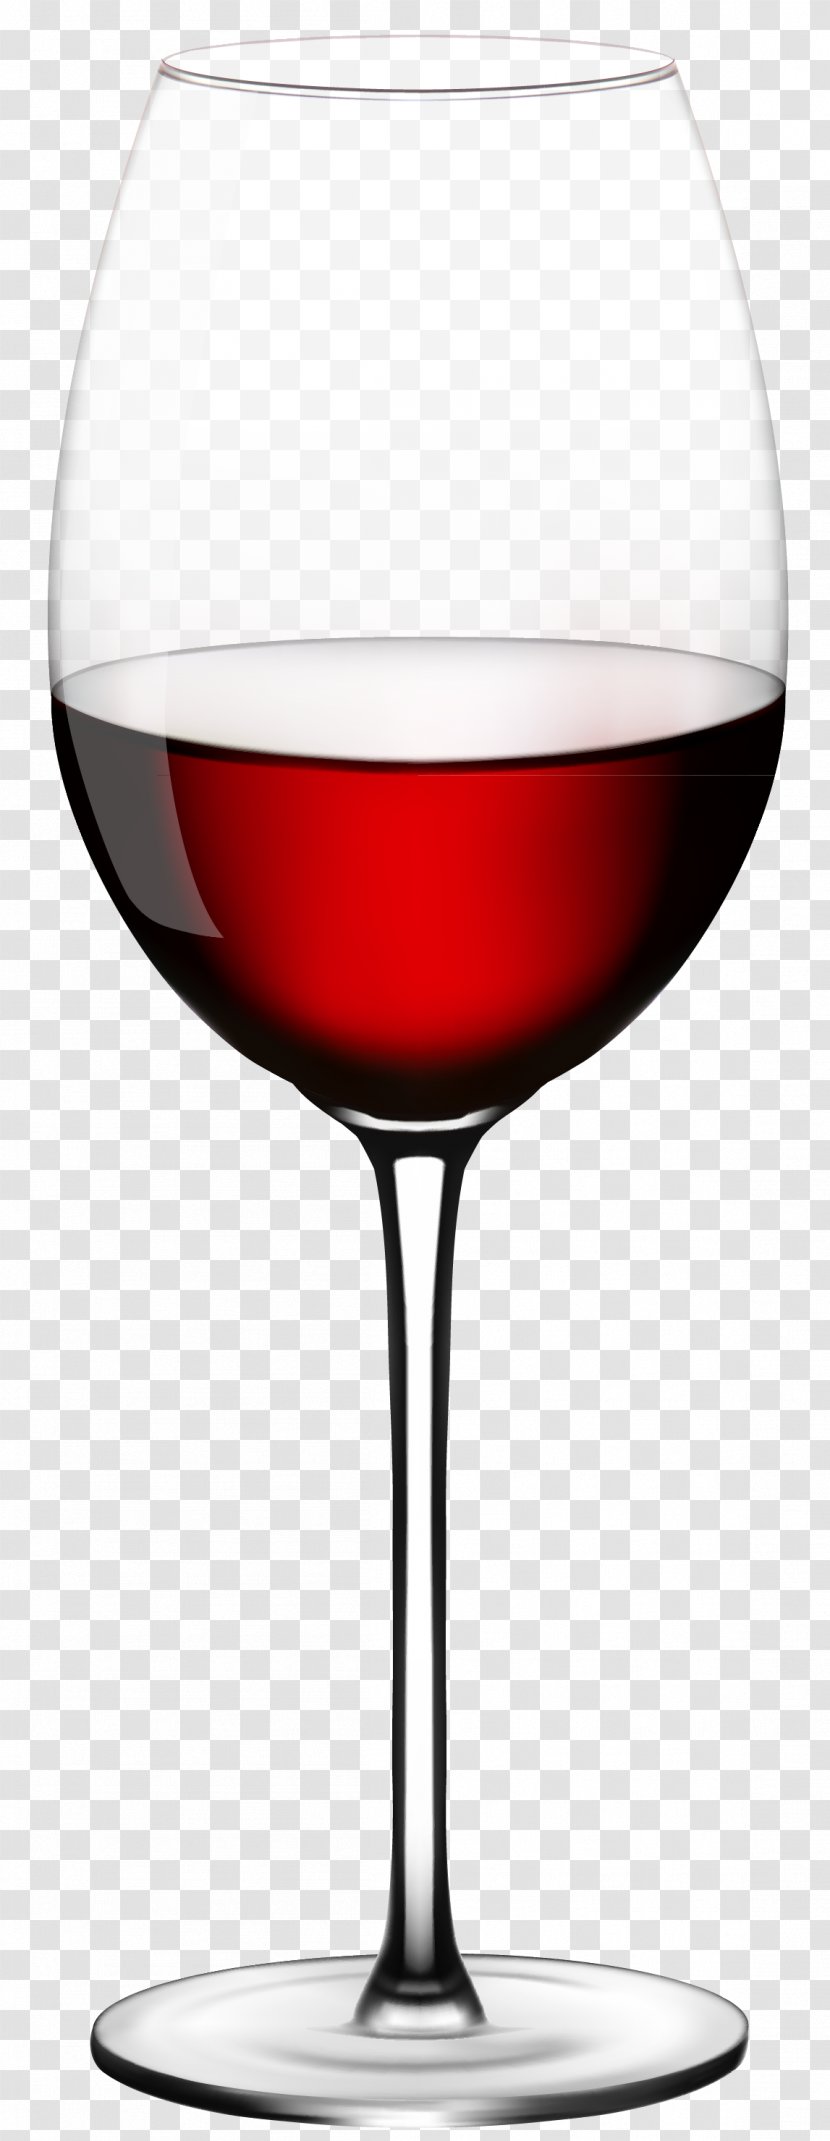 Red Wine Champagne Glass - Drink - Image Transparent PNG